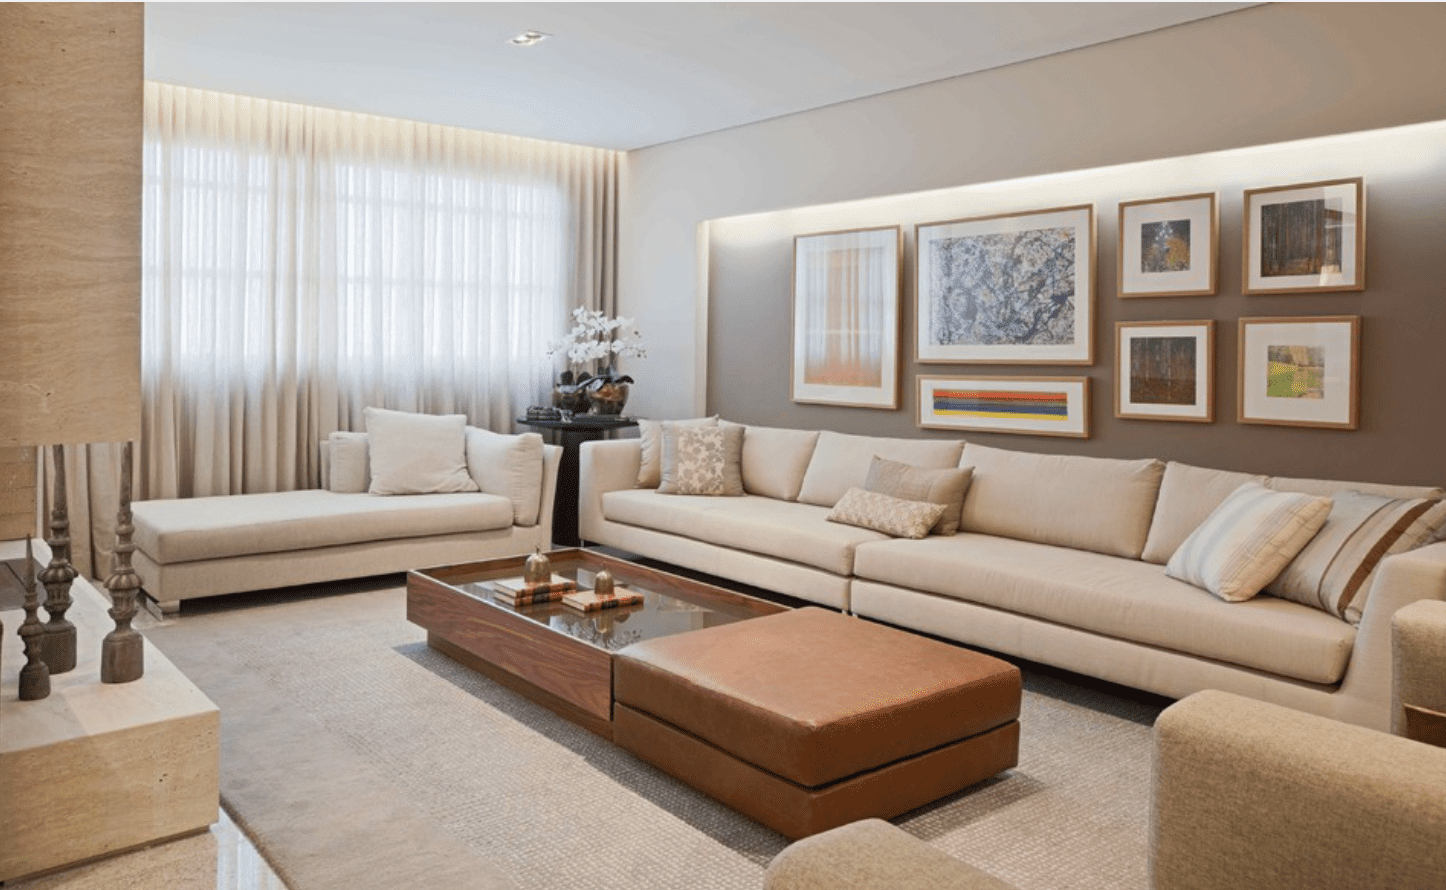 Gorgeous long living room ideas for your home - 69